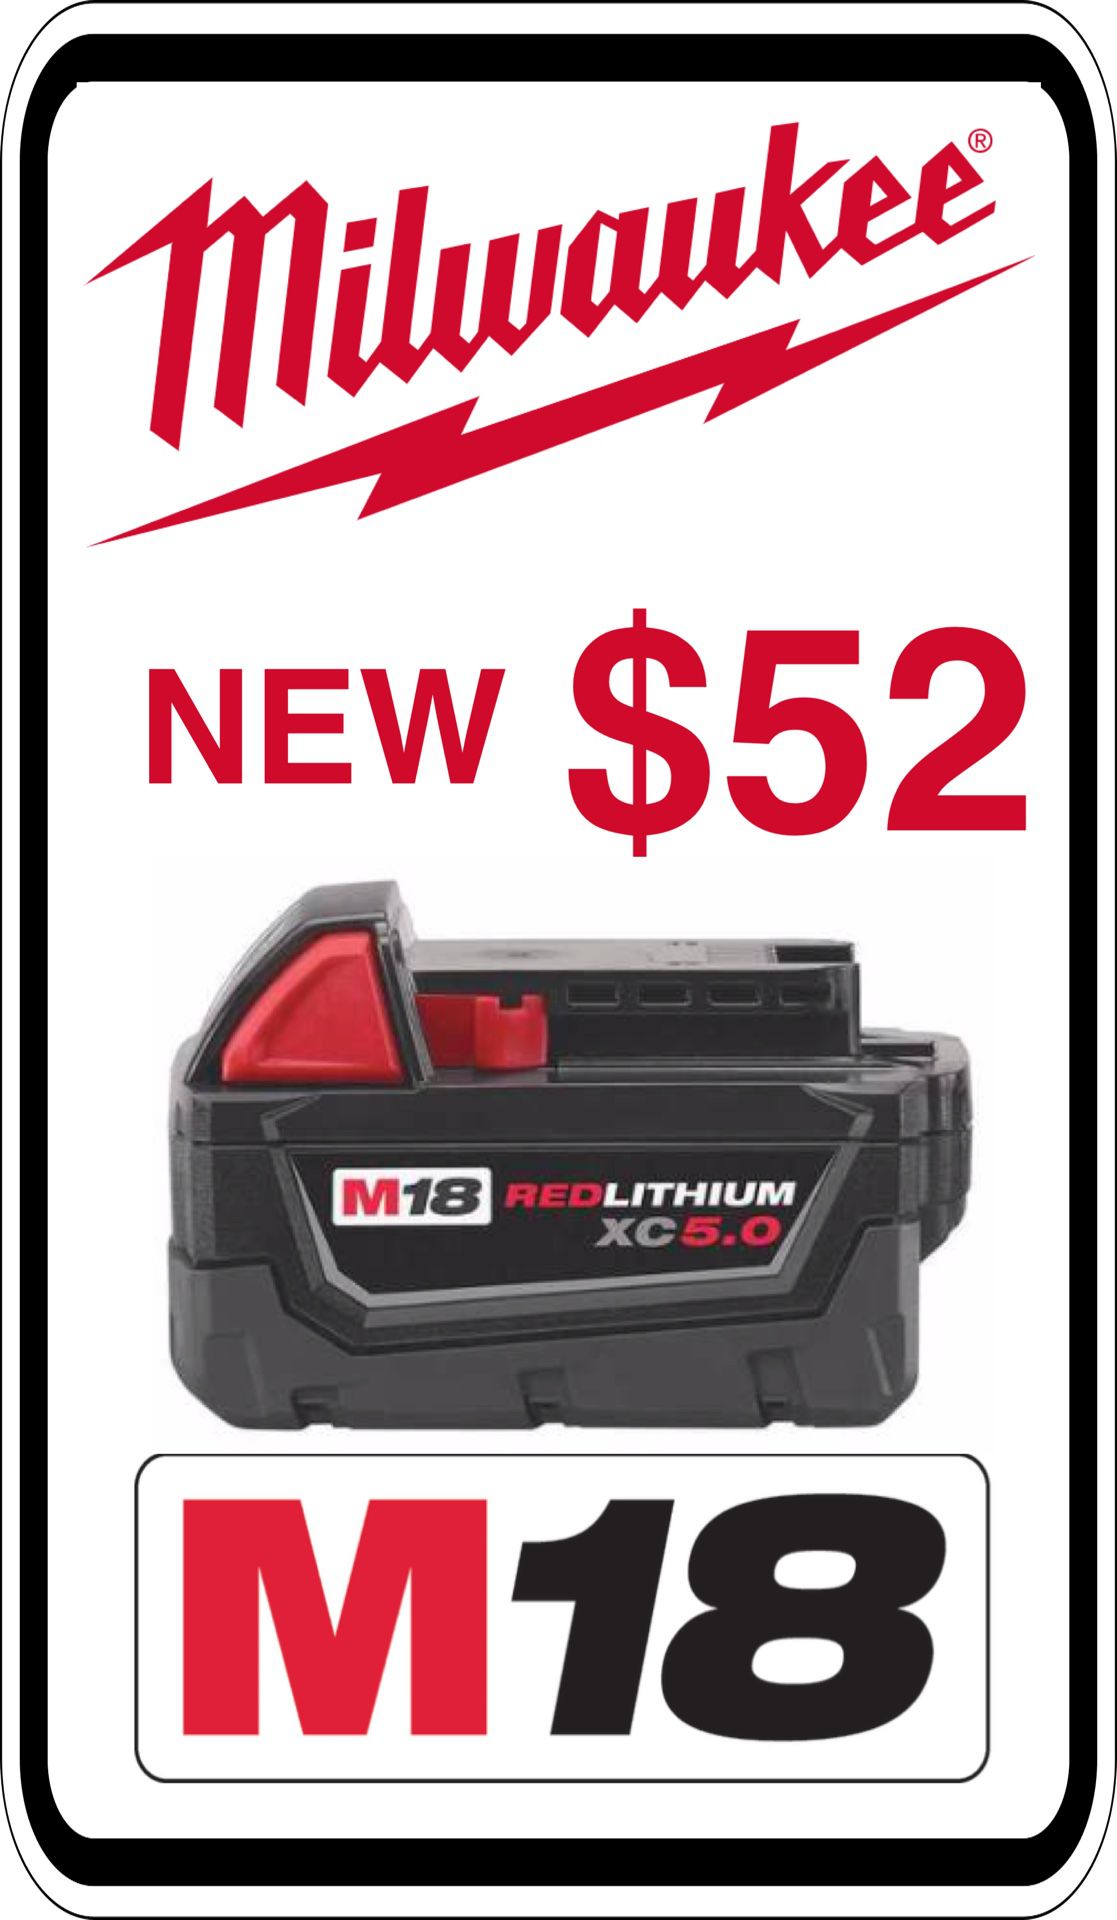 BRAND NEW - Milwaukee M18 5.0 Battery - We accept trades & Credit Cards - AzBE Deals